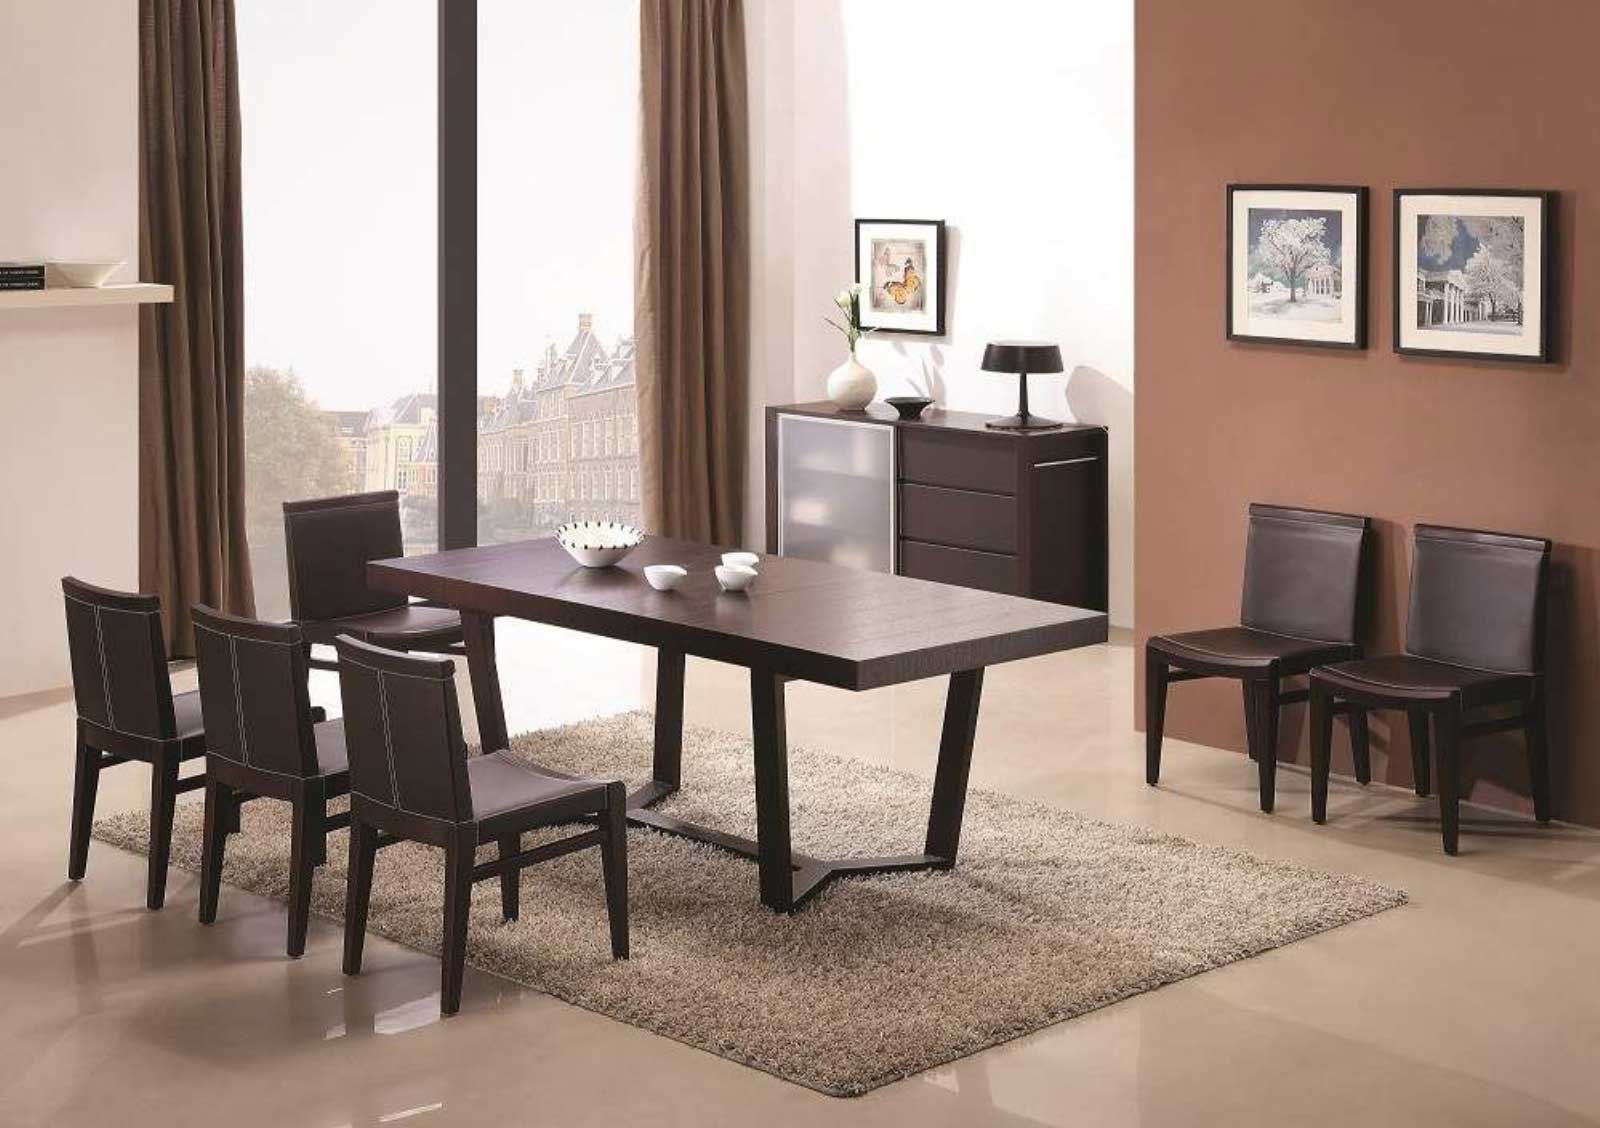 Dining Room Big Astonishing Dining Room Ideas For Big Family Design With Transitional Expanding Dinner Table And Interesting Black Wooden Chairs Idea Also Charming Beige Feather Carpet Design Dining Room The Best Simple Dining Room Ideas